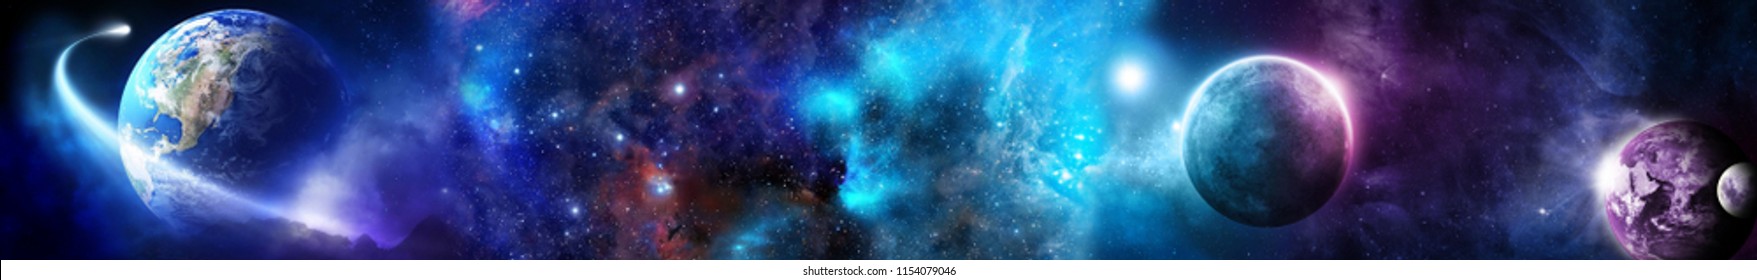 Space scene with planets, stars and galaxies. Panorama. Horizontal view for a glass panels (skinali). - Shutterstock ID 1154079046